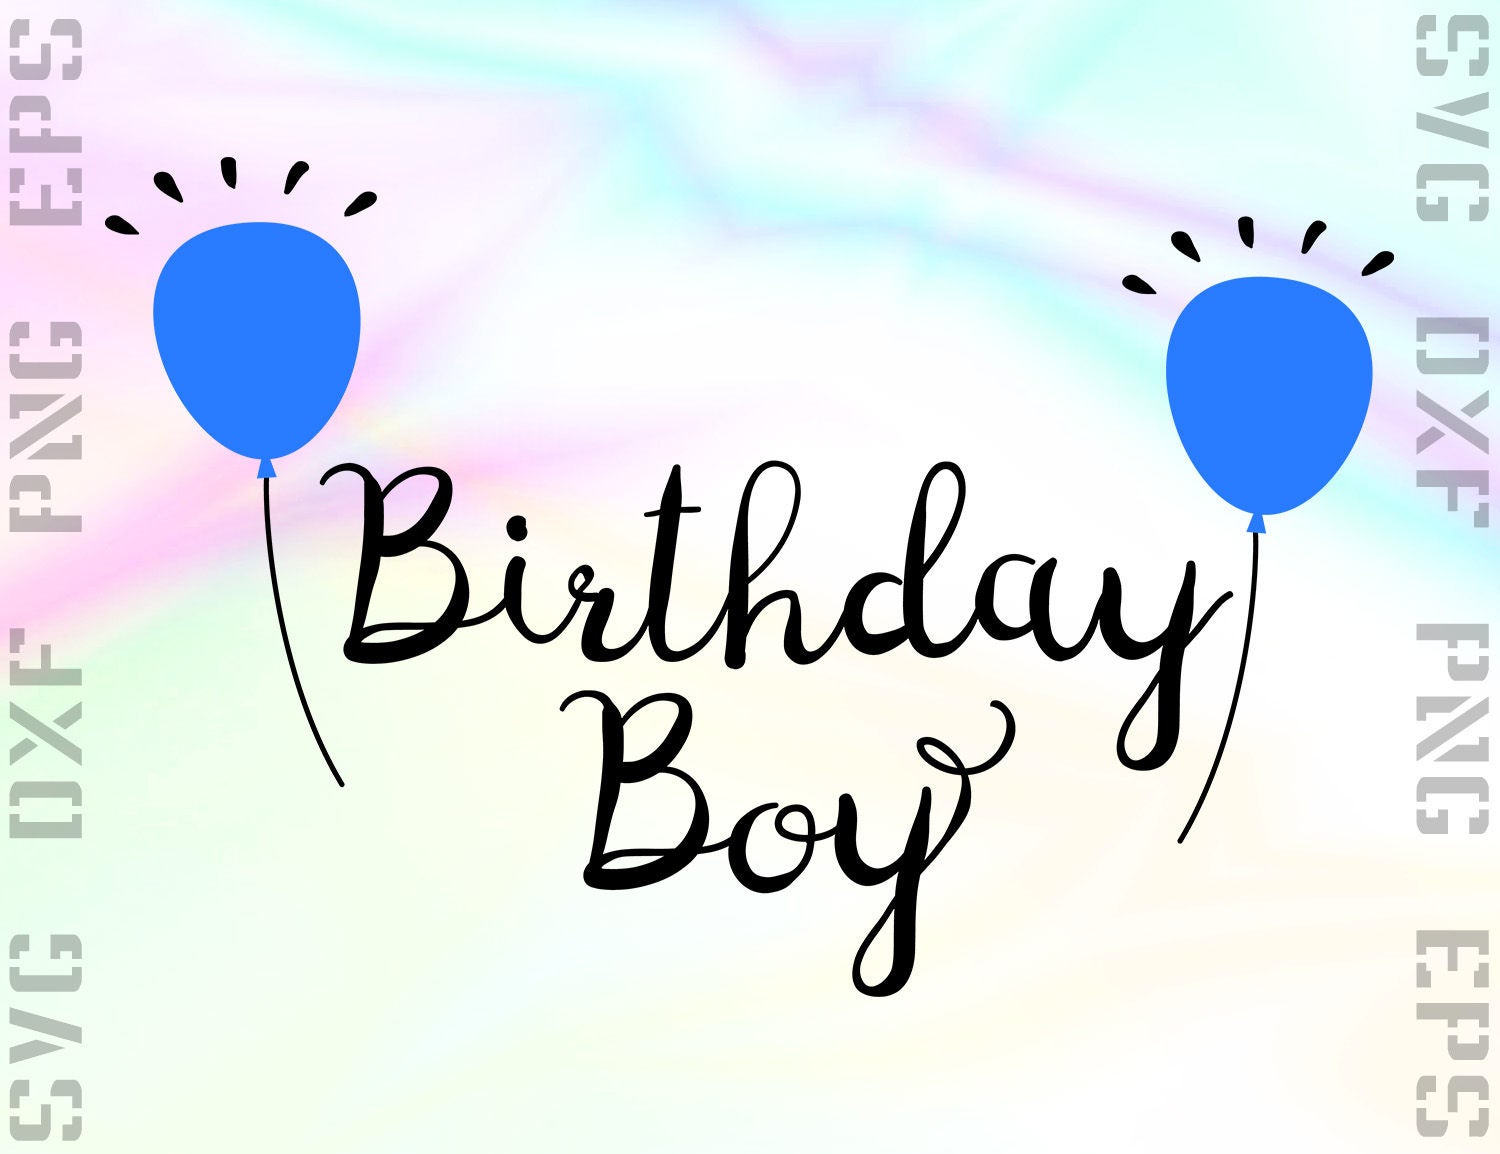 Download Birthday Boy SVG Saying Cut File for Cricut or Silhouette and